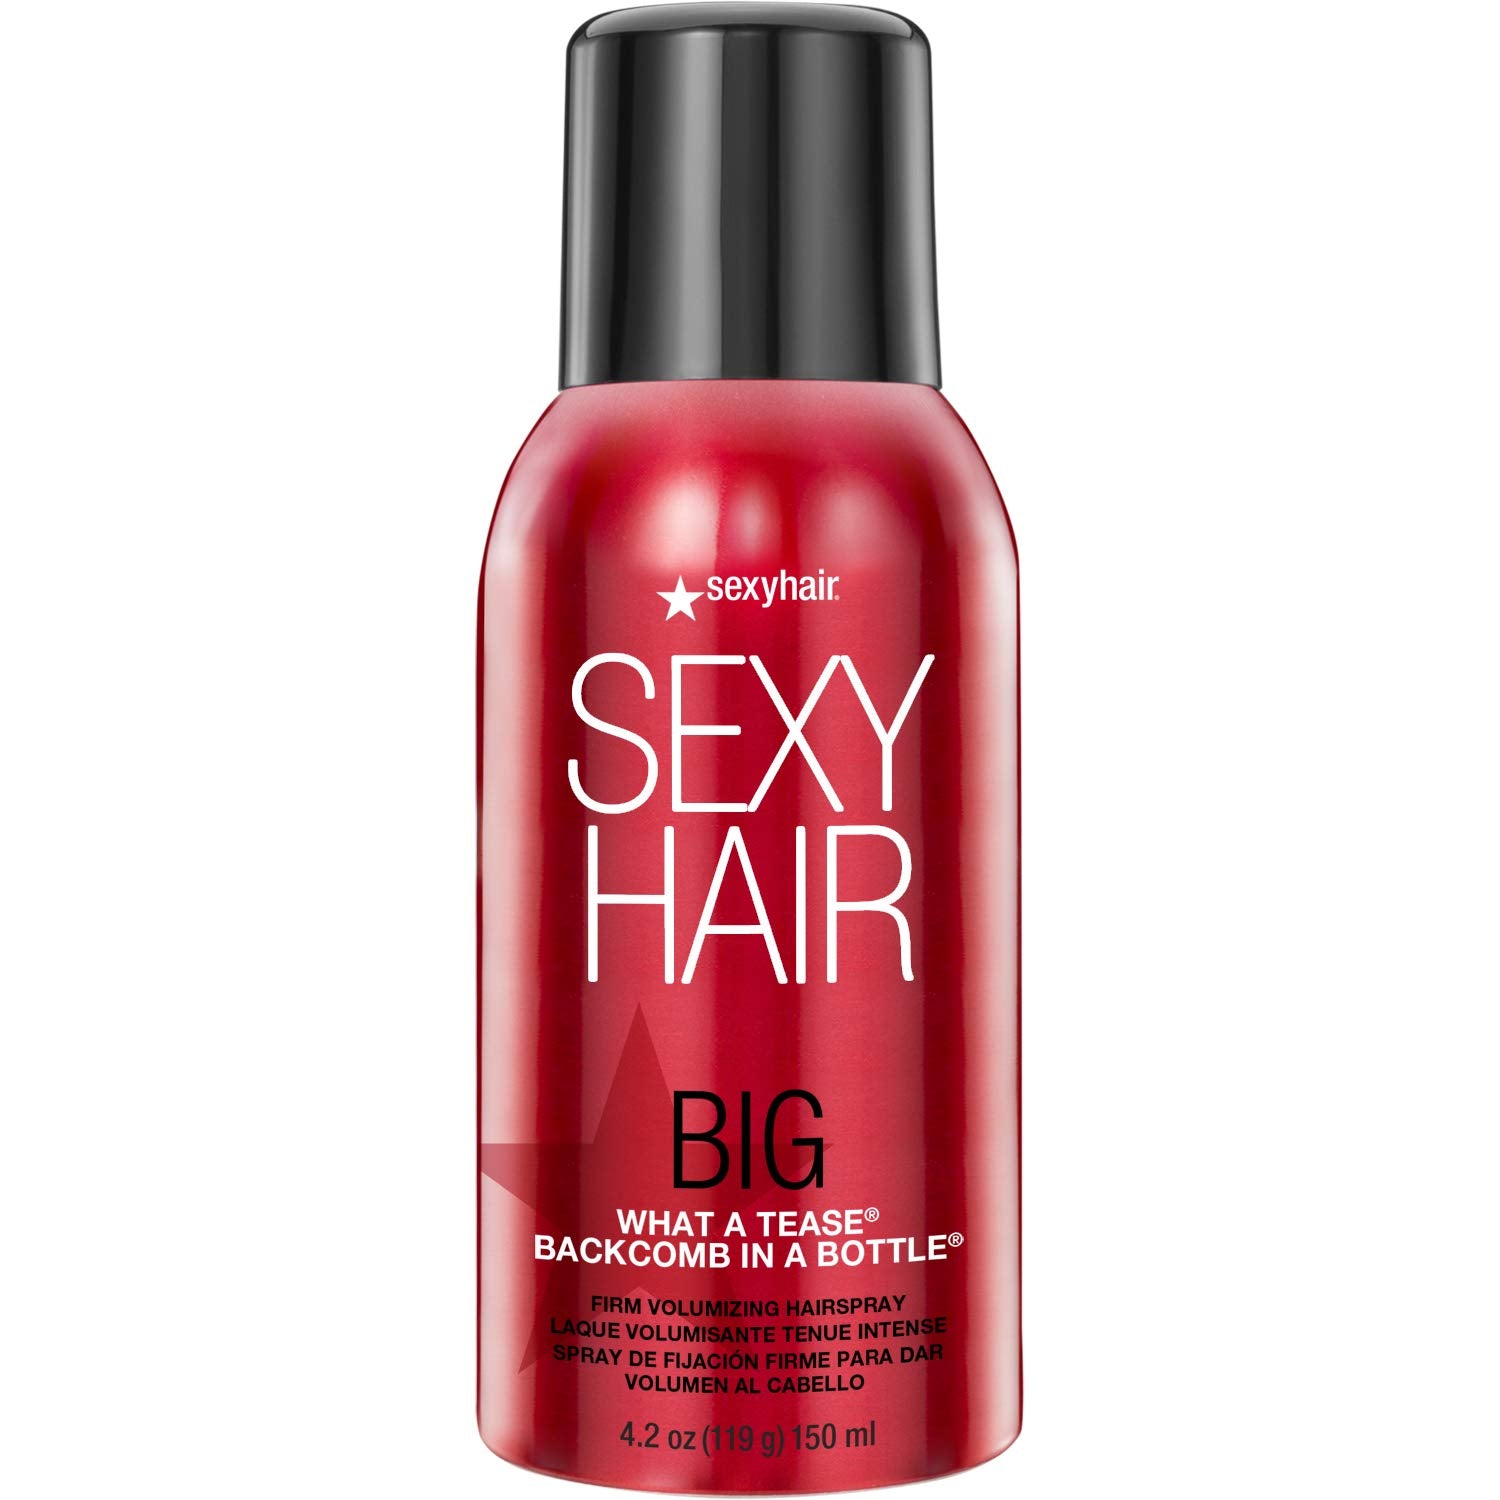 SexyHair Big What A Tease Backcomb in a Bottle Firm Volumizing Hairspray - 4.2 oz  (Buy 3 Get 1 Free Mix & Match)